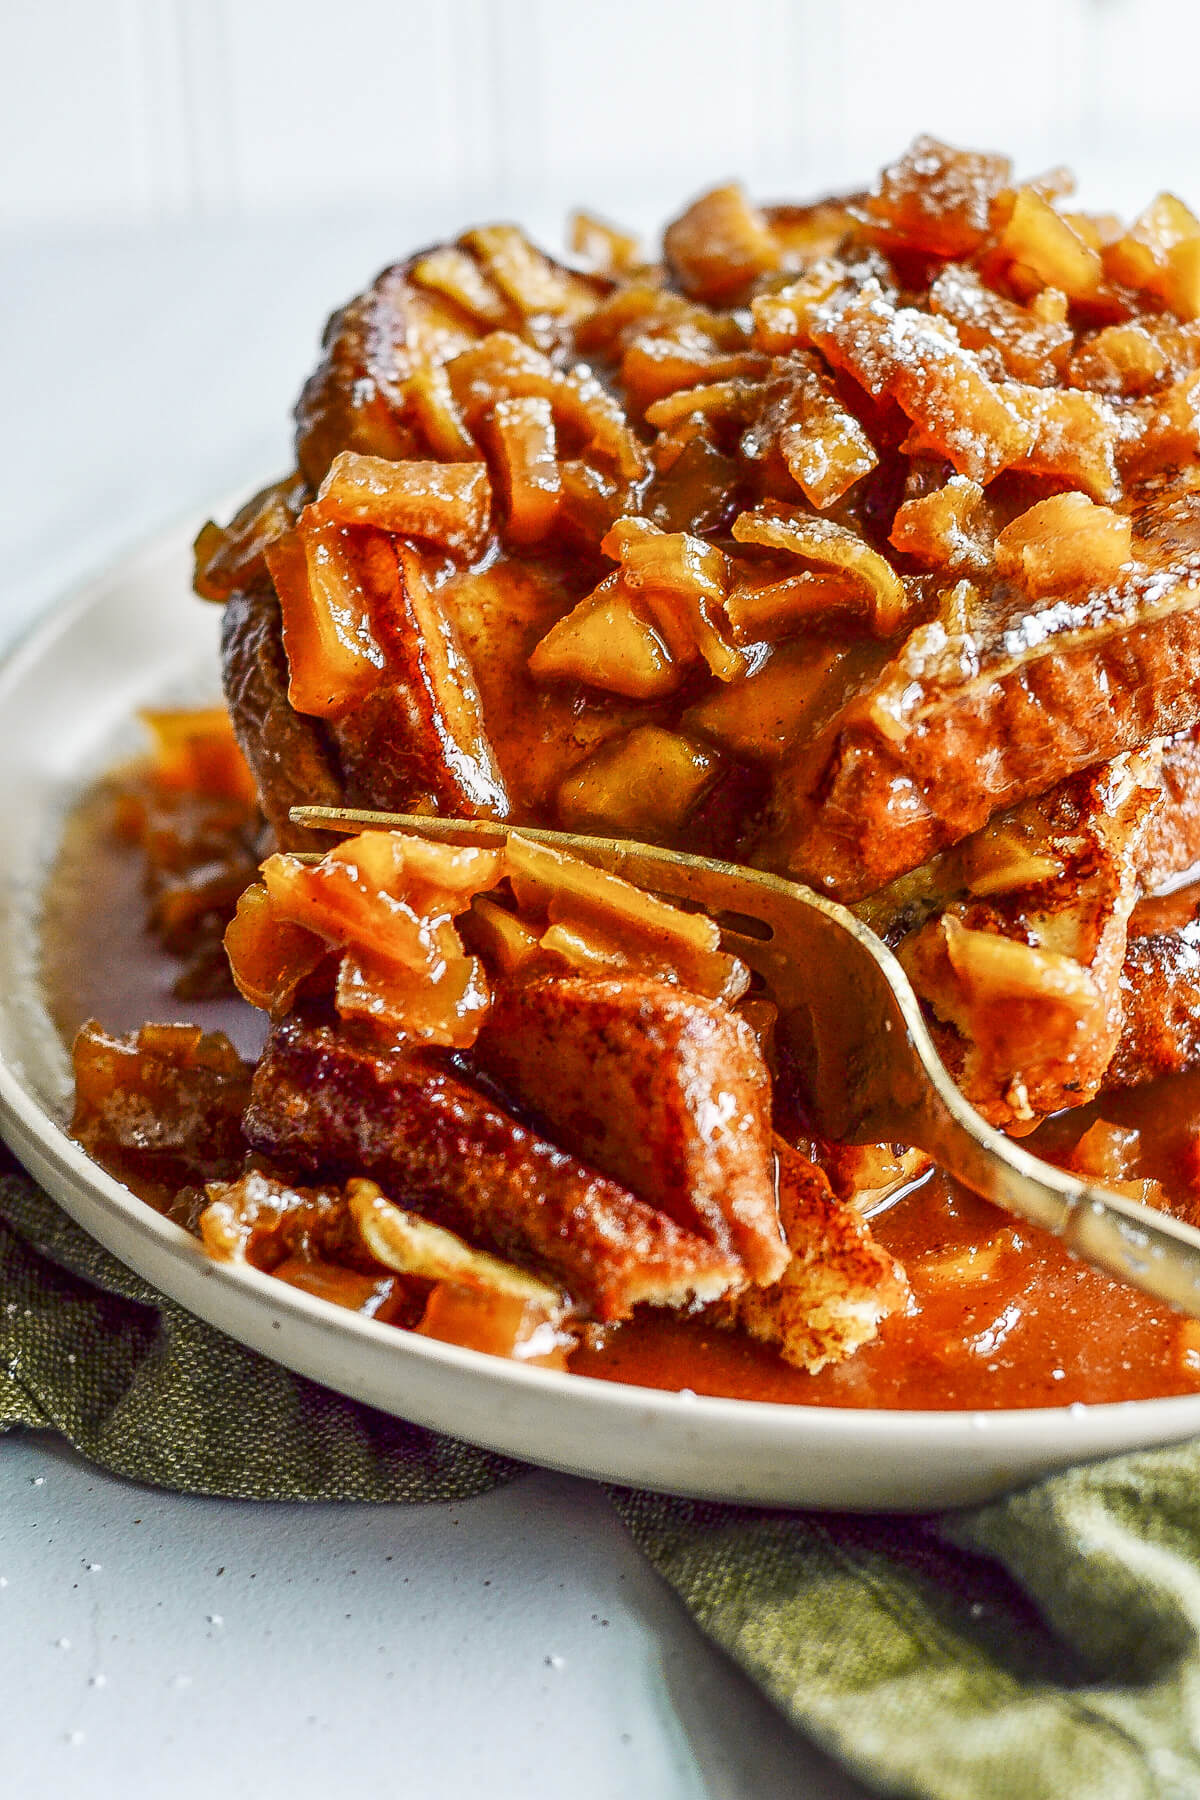 Cutting through a stack of Caramel Apple French toasts with a fork.